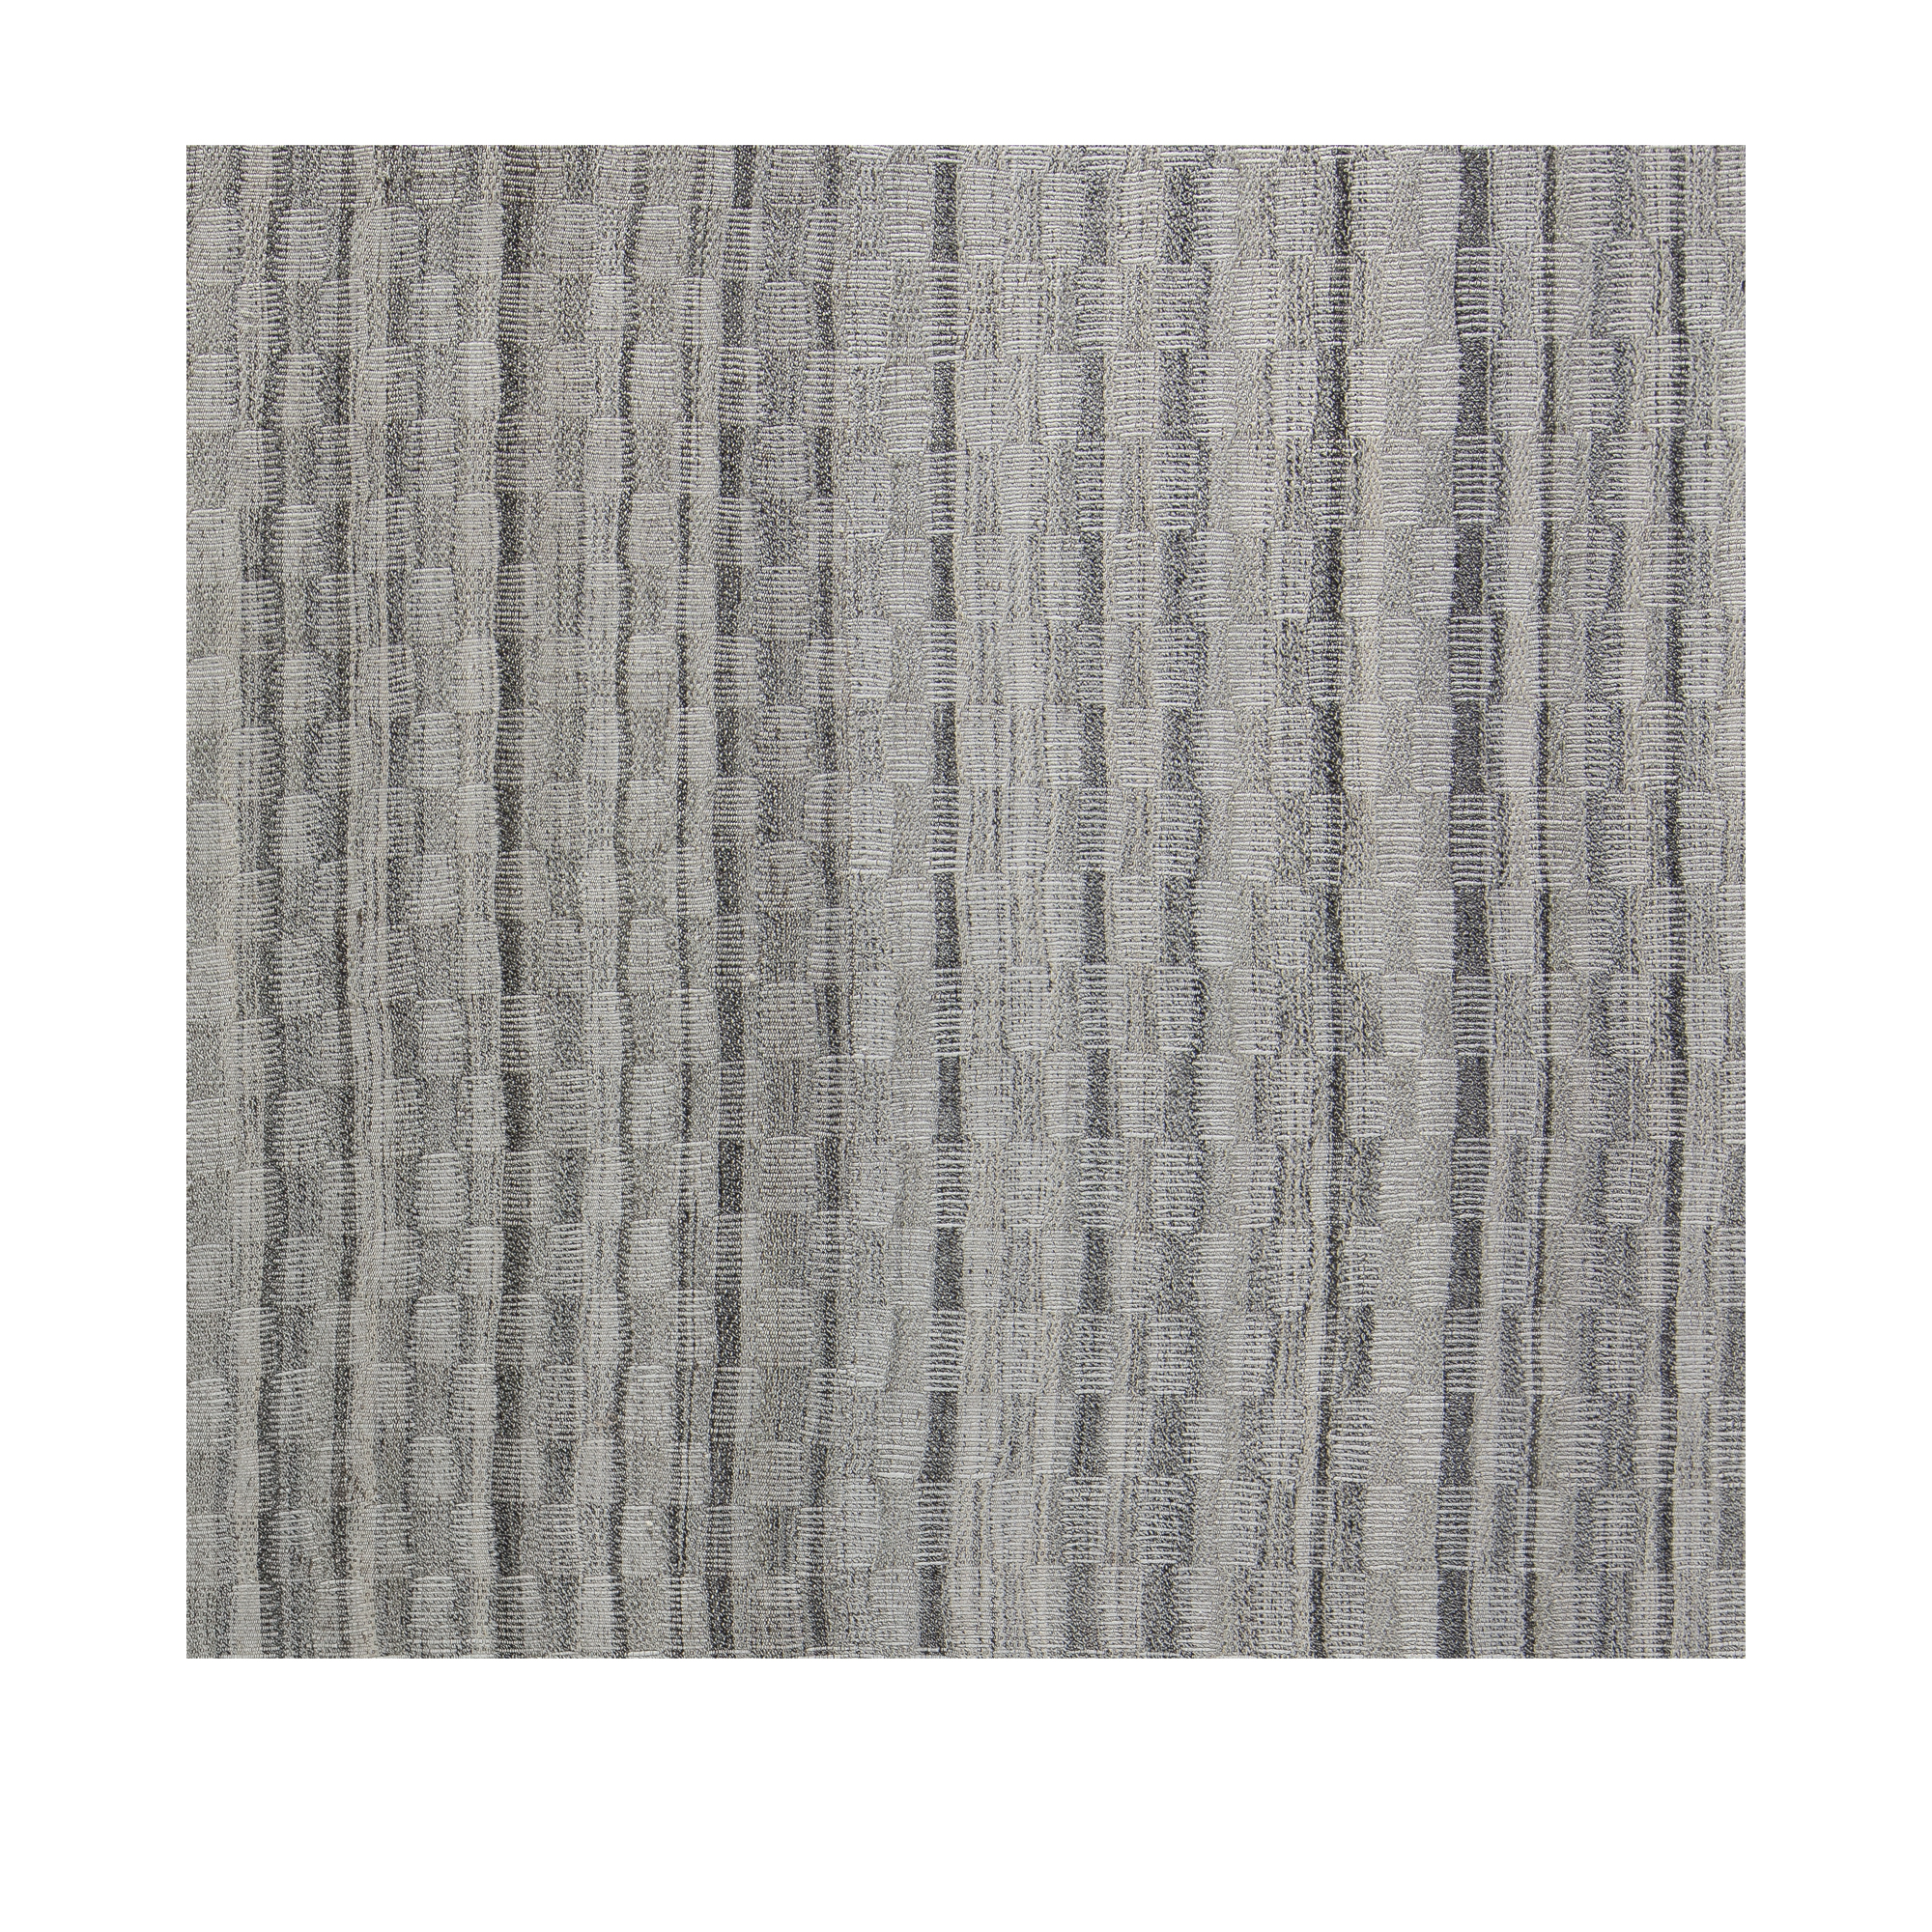 This Pelas Charmo flatweave rug is made with handspun wool and natural dyes. 